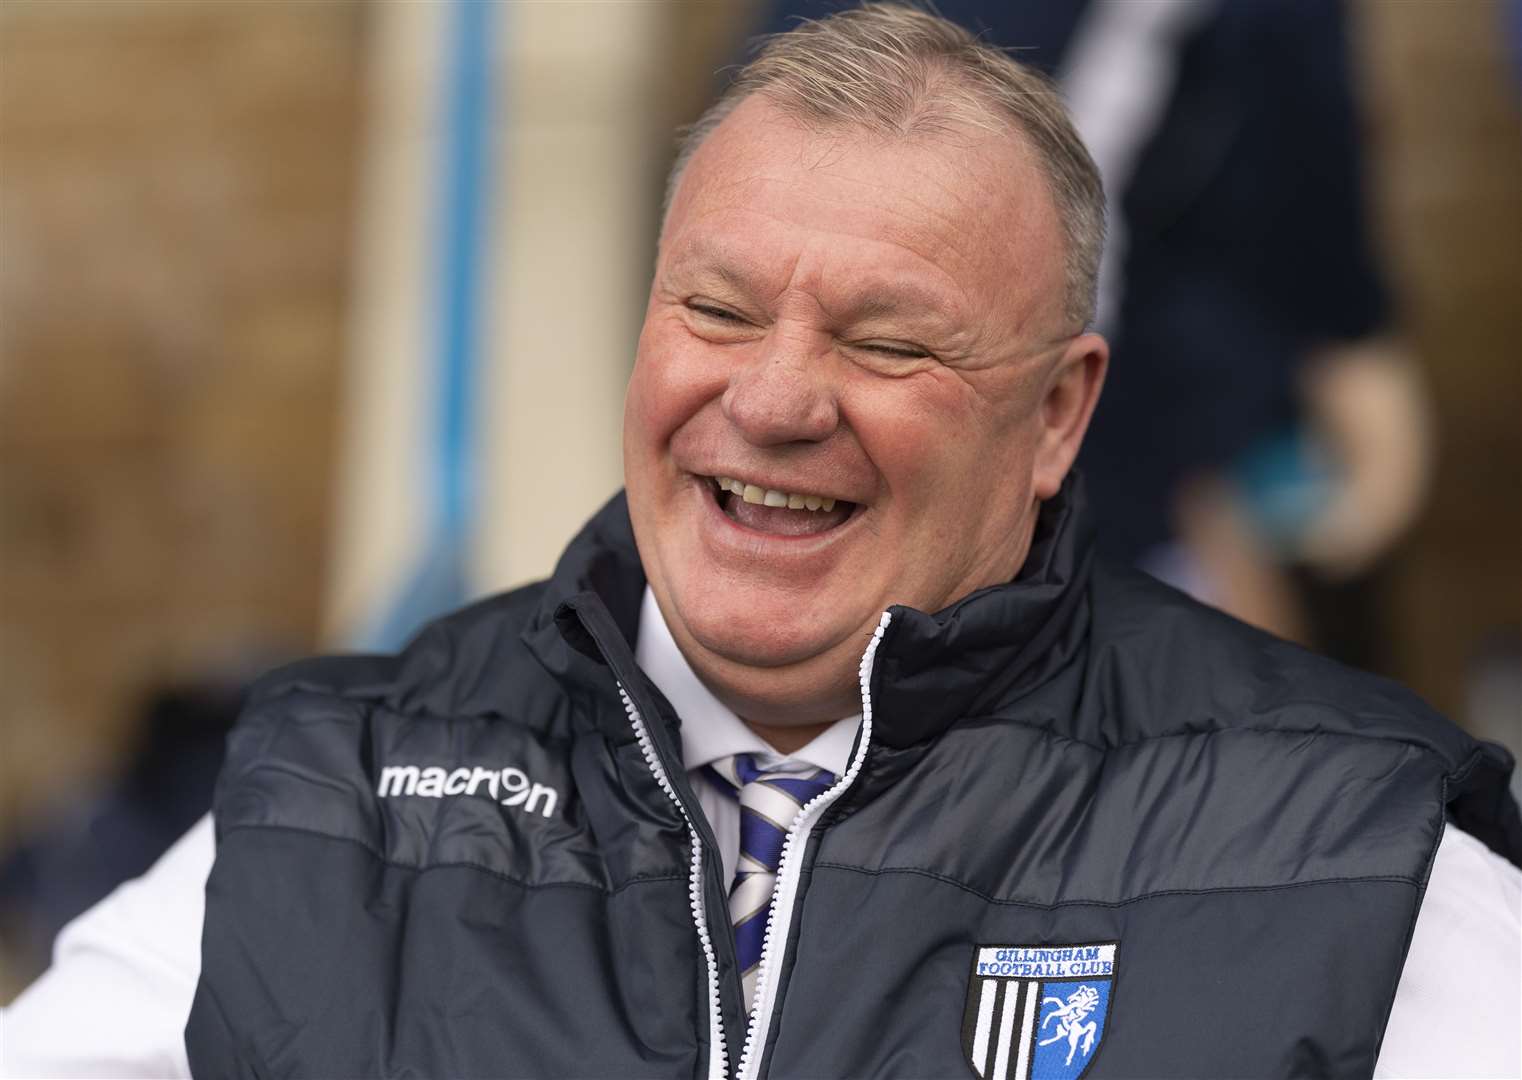 Gillingham manager Steve Evans enjoyed Friday's training after Scotland's Euro 2020 qualification Picture: Ady Kerry